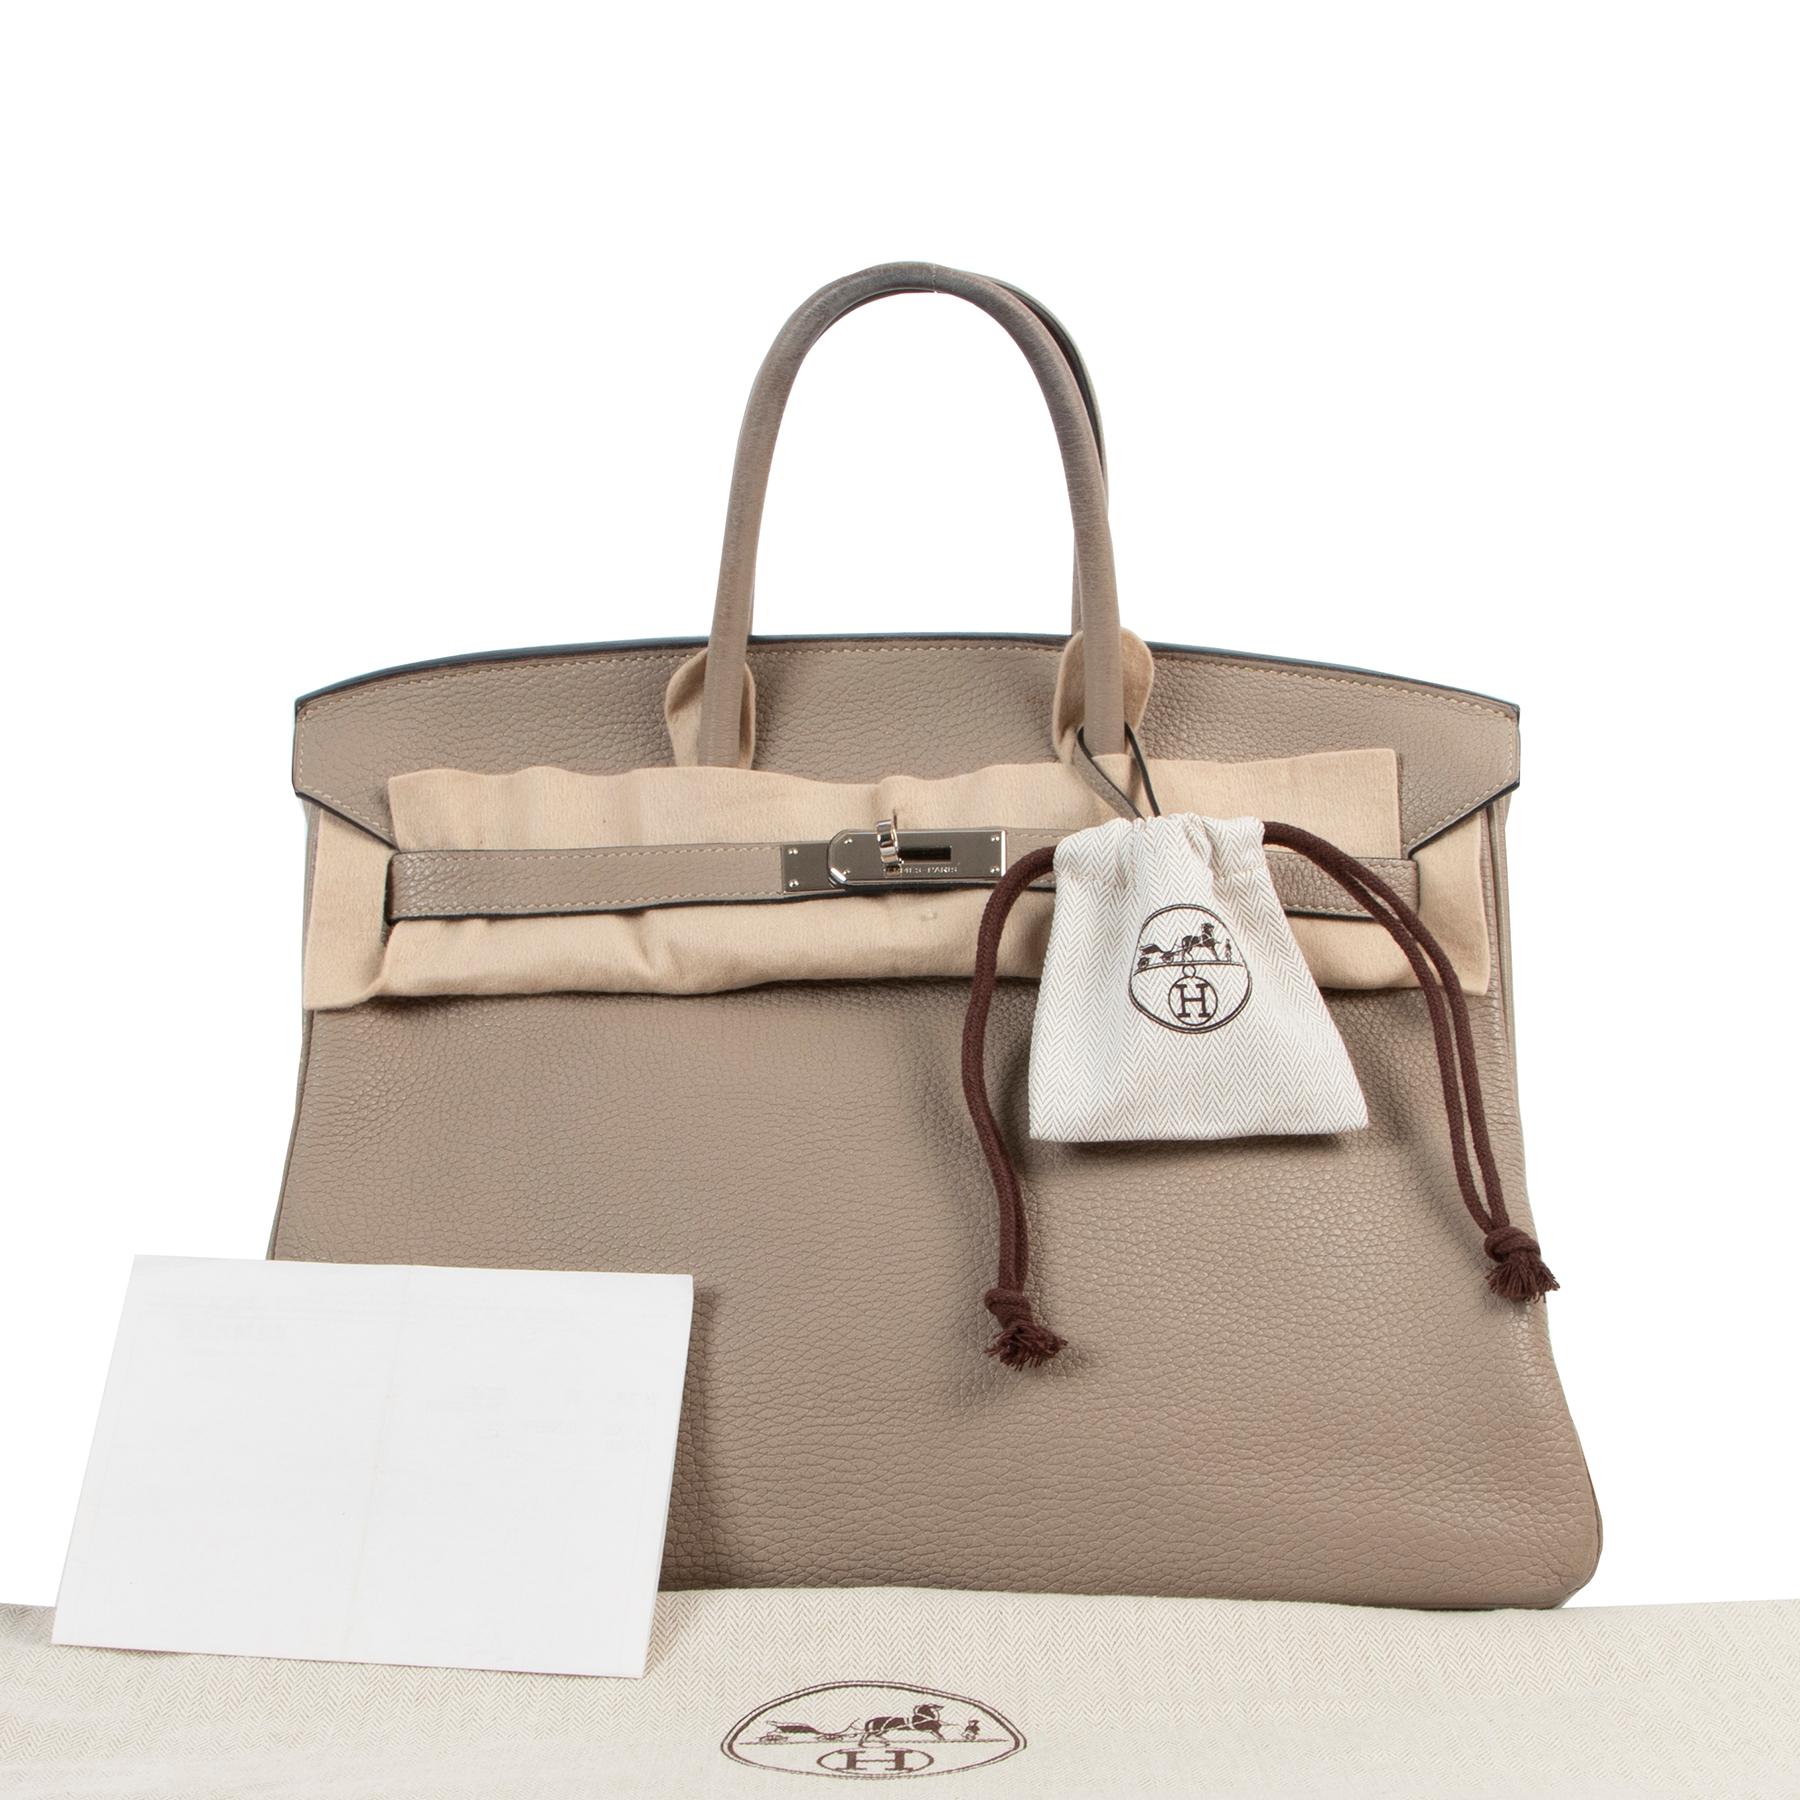 Hermès Birkin 35 Gris Tourterelle Veau Togo Doublure Chevre Pigmente PHW

This iconic Hermès Birkin bag comes in a wonderful Gris Tourterelle, a neutral hue, making it the perfect fit for your daily adventures. The lightly pebbled Togo leather is